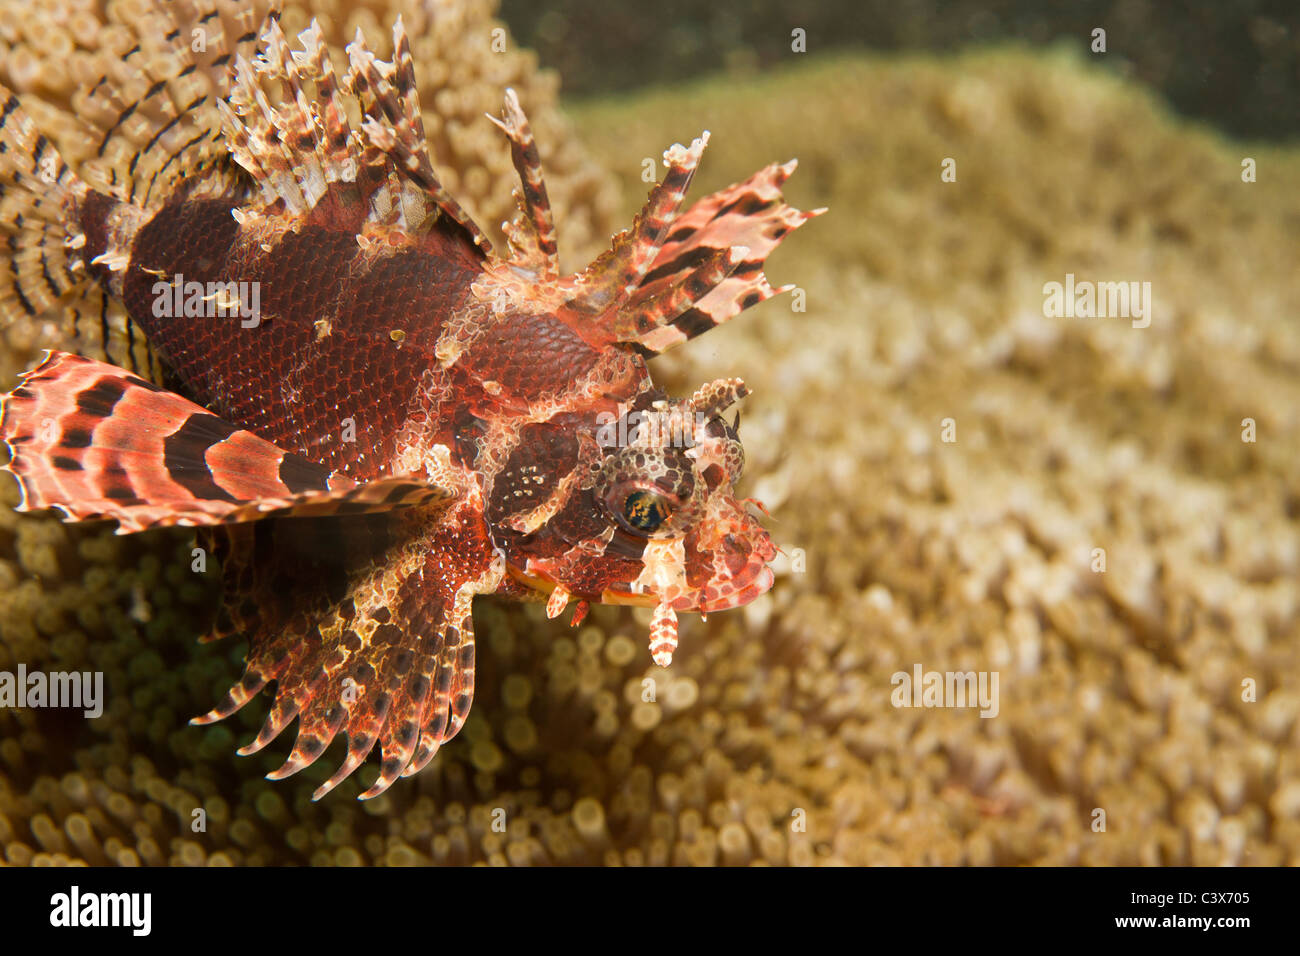 Shortfin lionfish in the Lembeh Straits Stock Photo